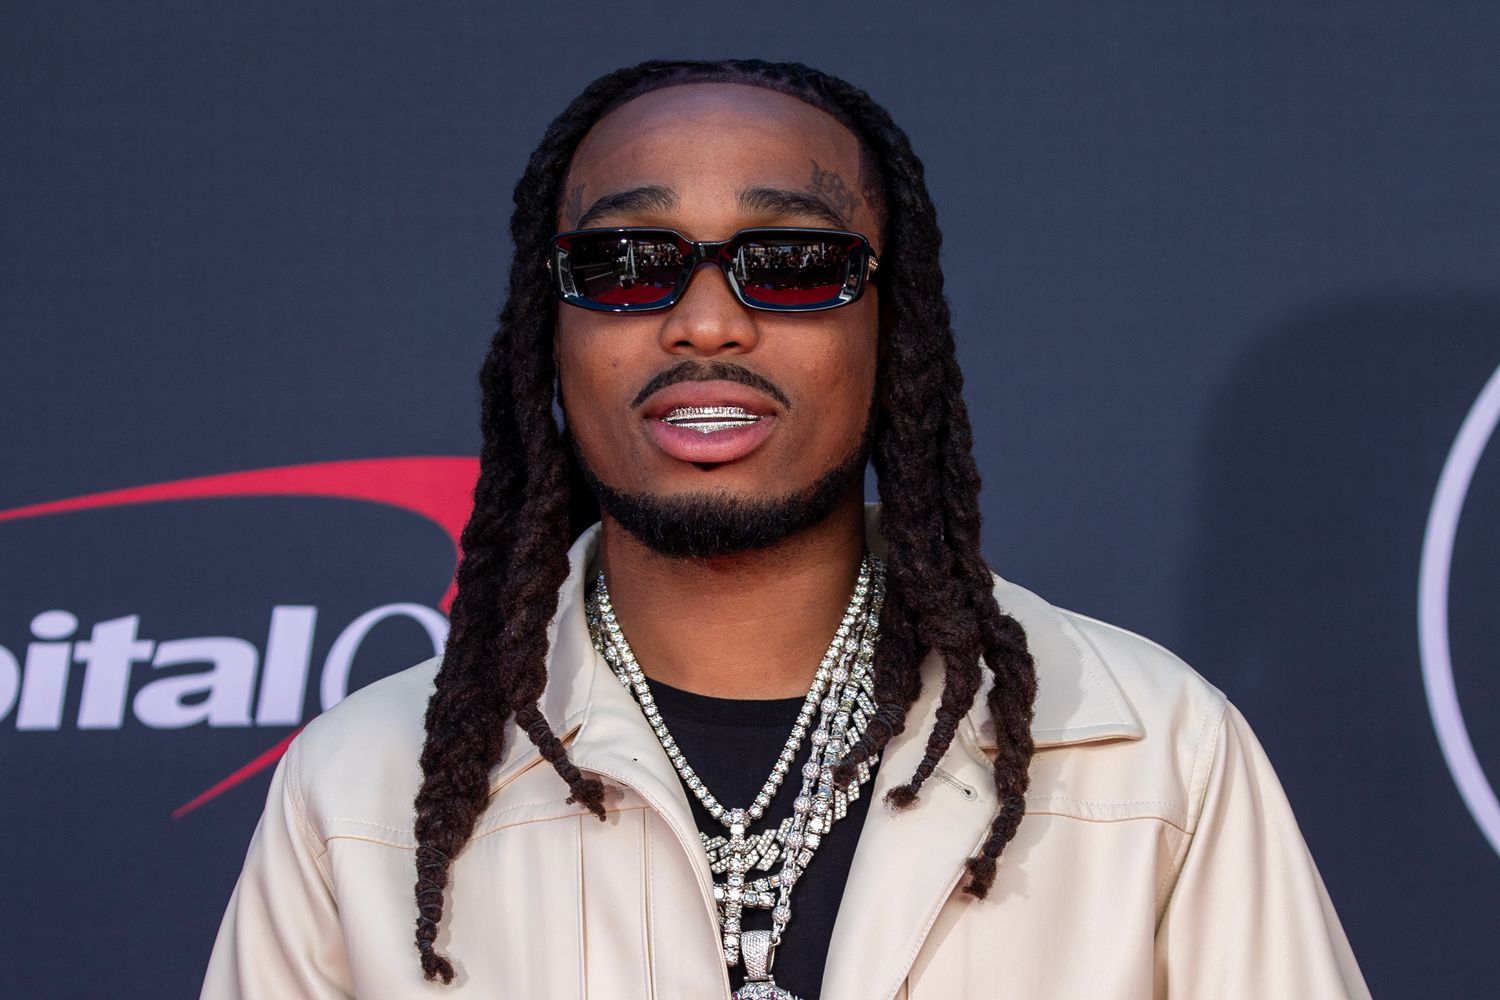 quavo-lights-up-milan-with-surprise-performance-at-1989-studio-launch